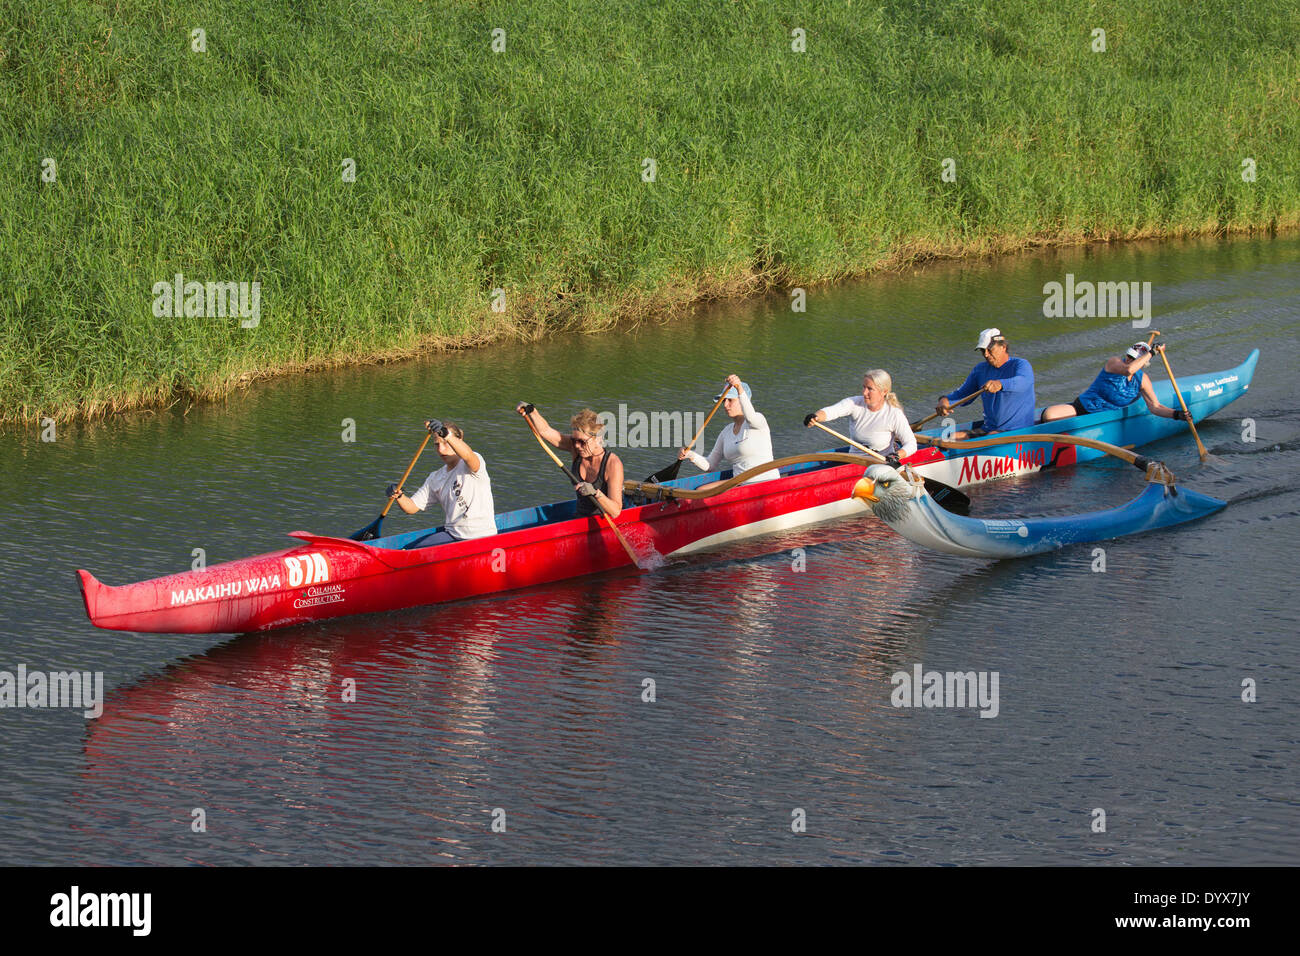 Women training in outrigger canoes in the Hanalei River, on the north shore of Kauai. Outrigger canoe paddling is the Hawaiian state team sport. Stock Photo